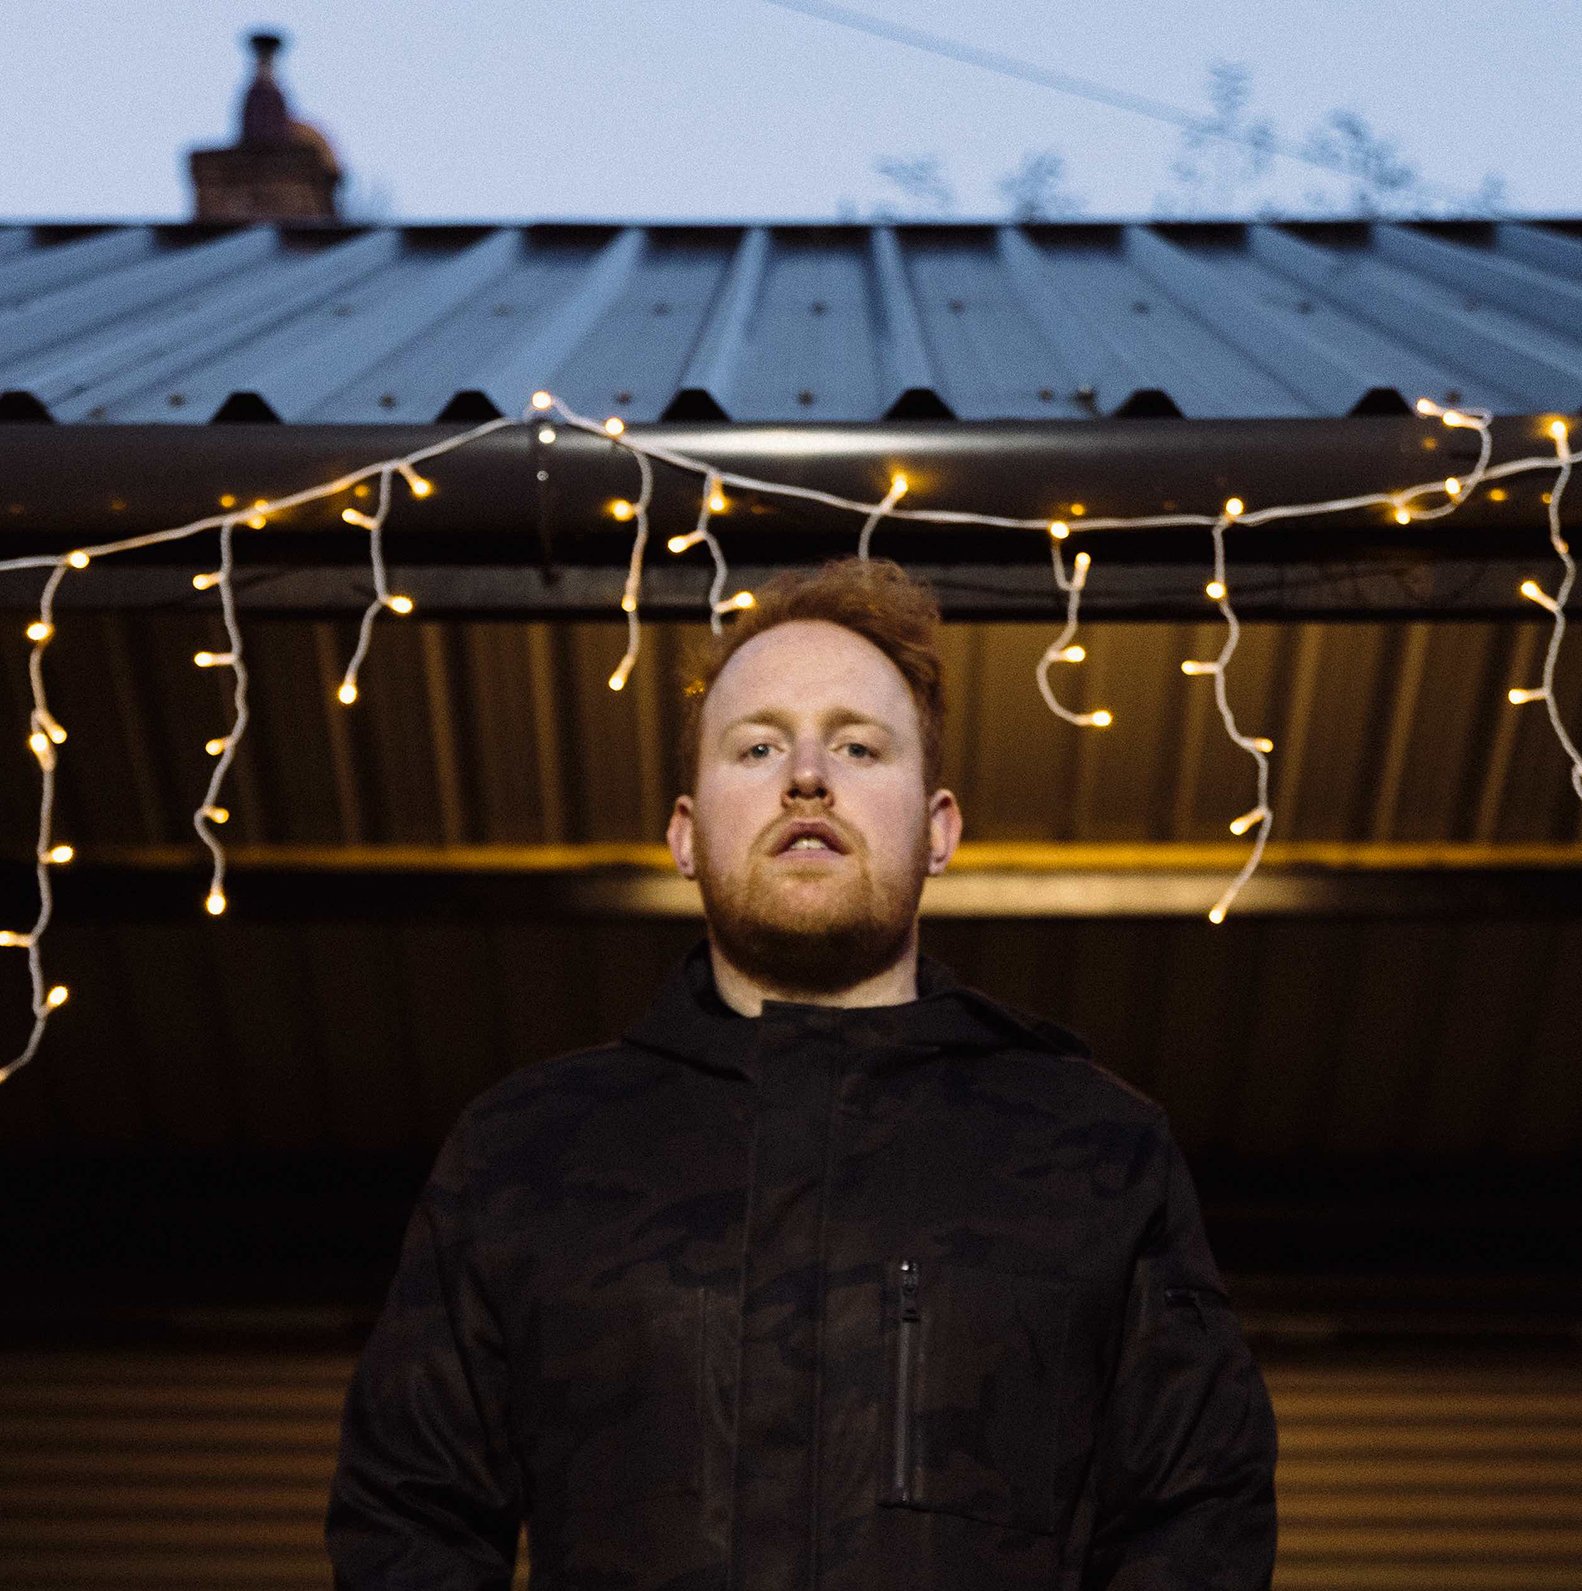 GAVIN JAMES returns with his largest headline Belfast show  at Custom House Square on Saturday 22nd August 